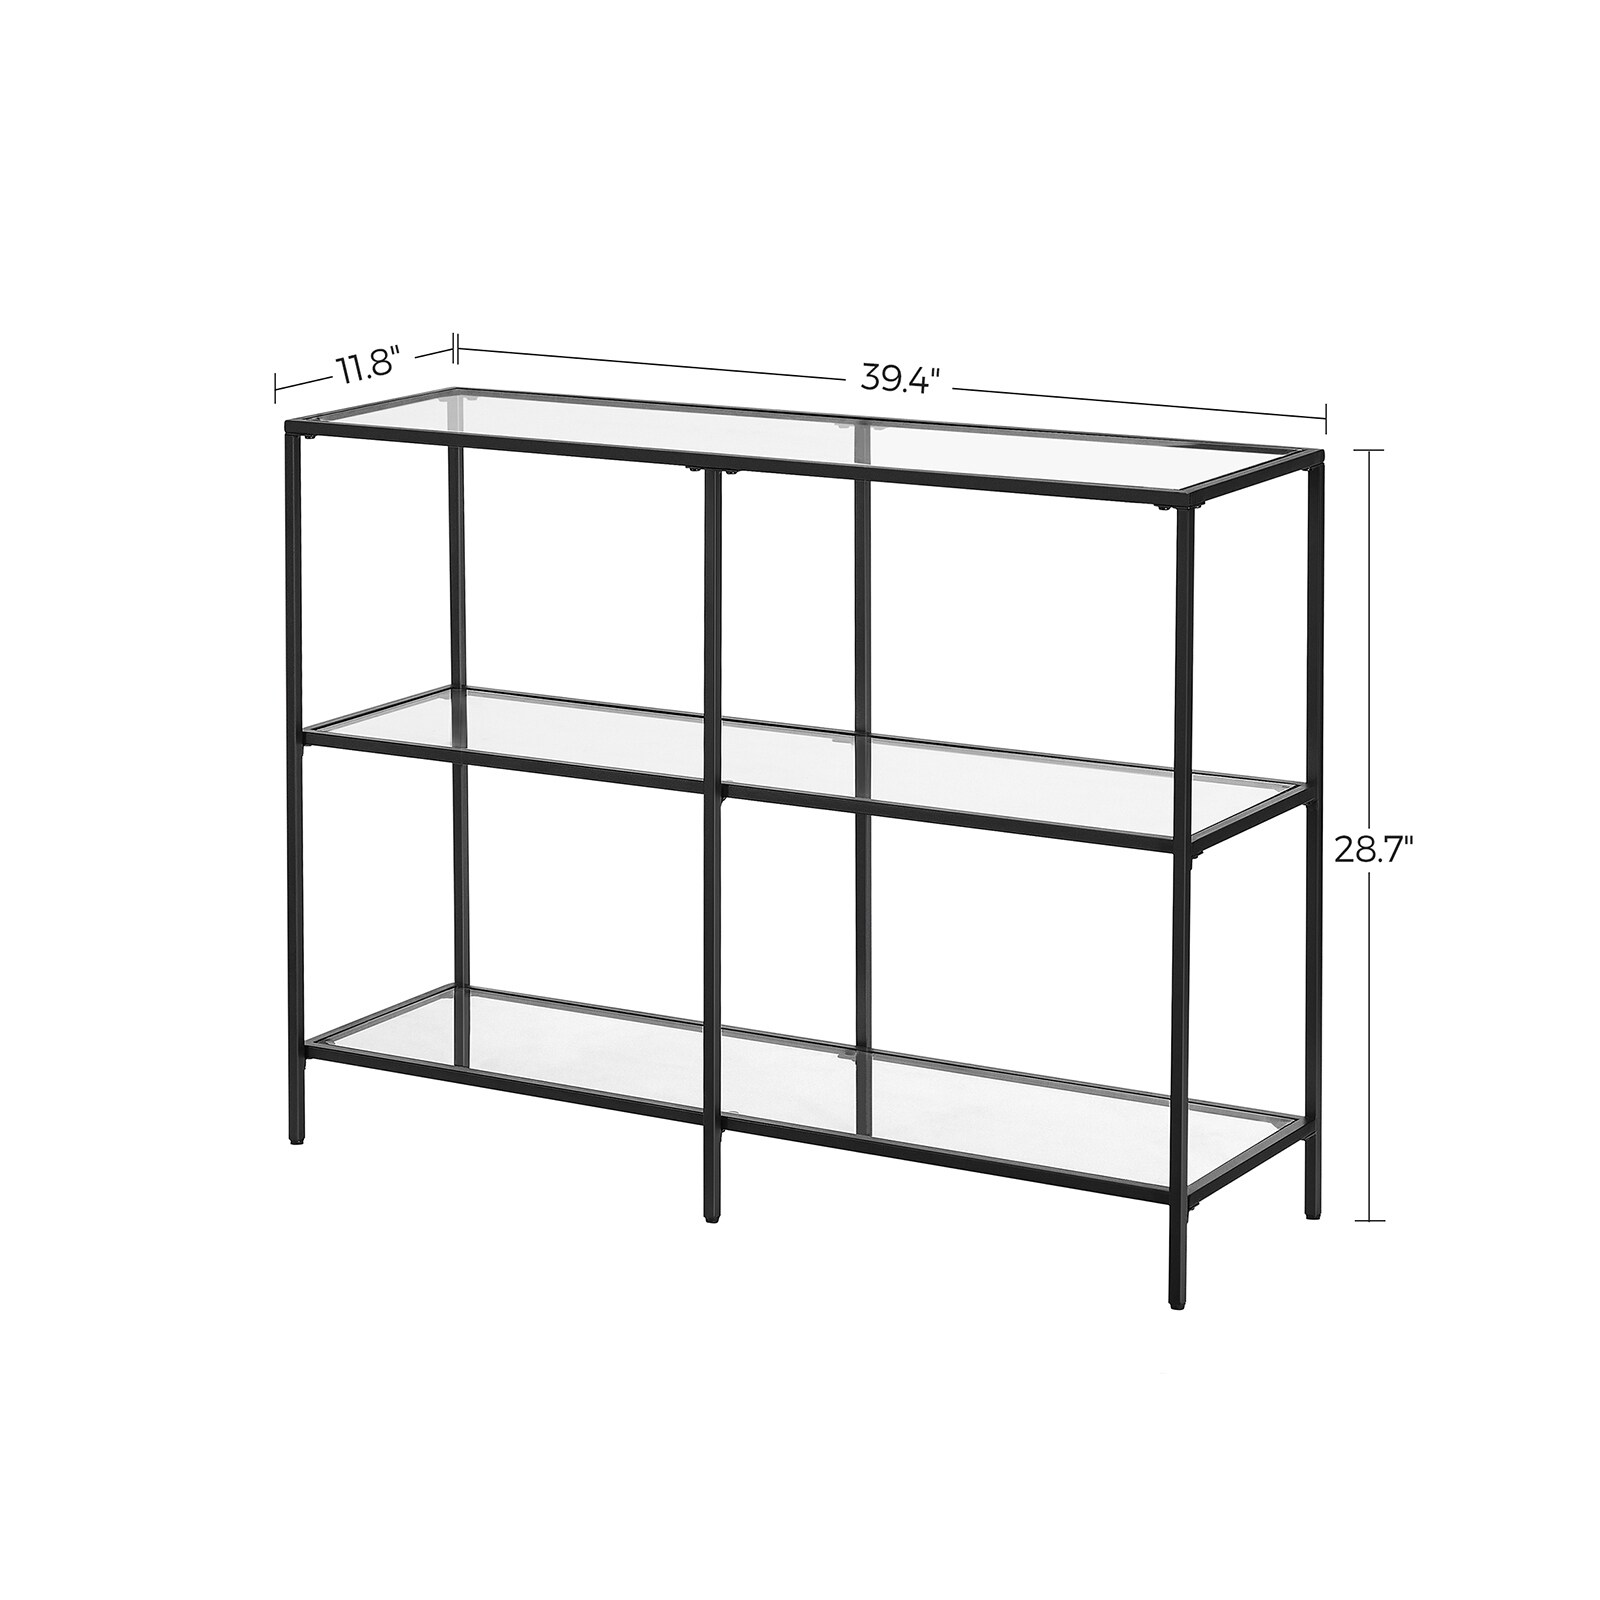 VASAGLE 39.4 Inch Console Table with 3 Shelves, Sofa Table , Entryway Table,  Metal Frame , Tempered Glass Shelf , Modern Style